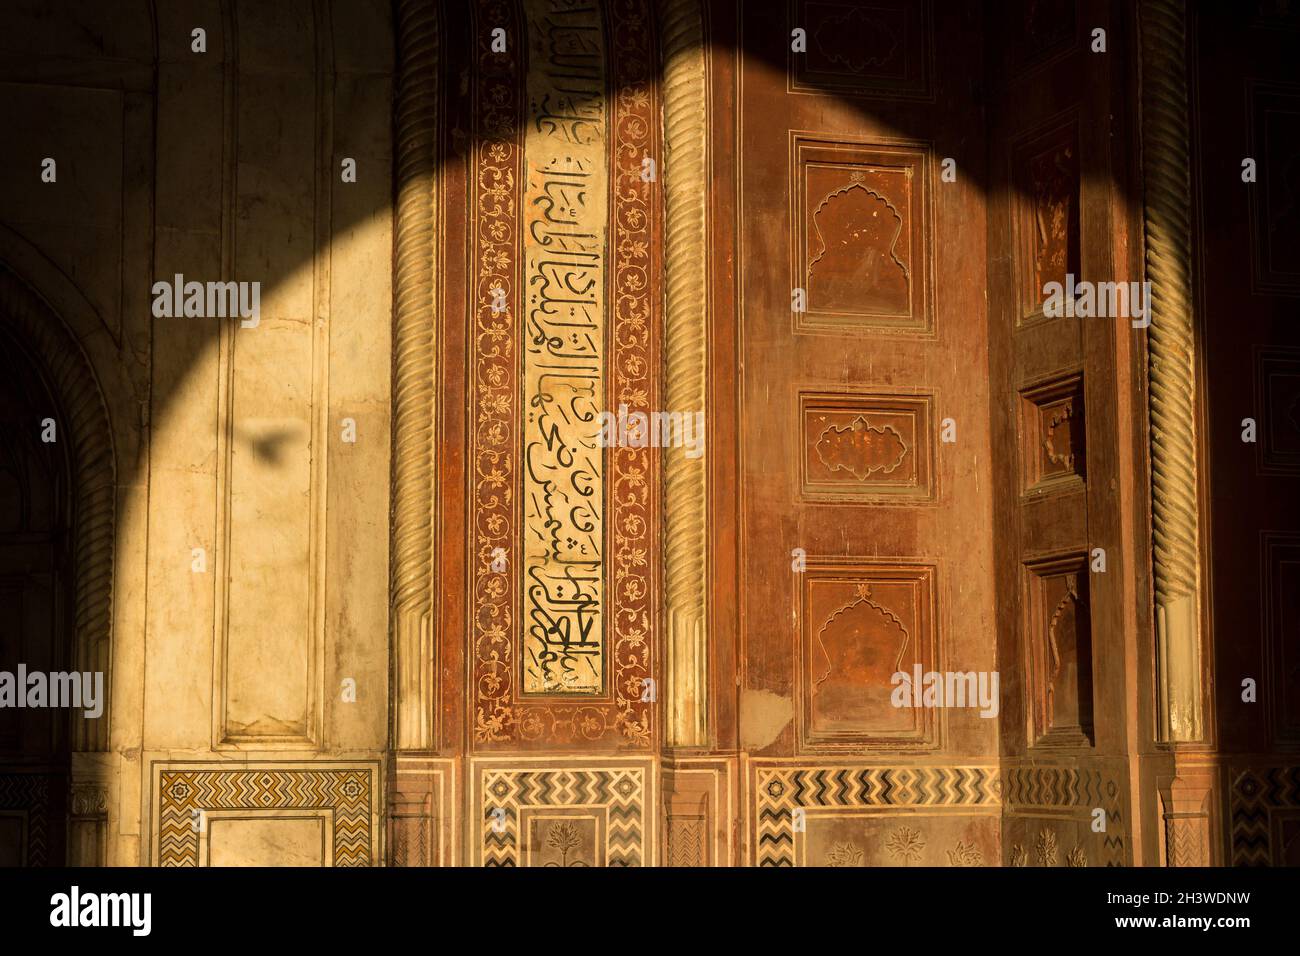 Interior of the mosque at Taj Mahal lit by the rising sun - detailed decoration Stock Photo